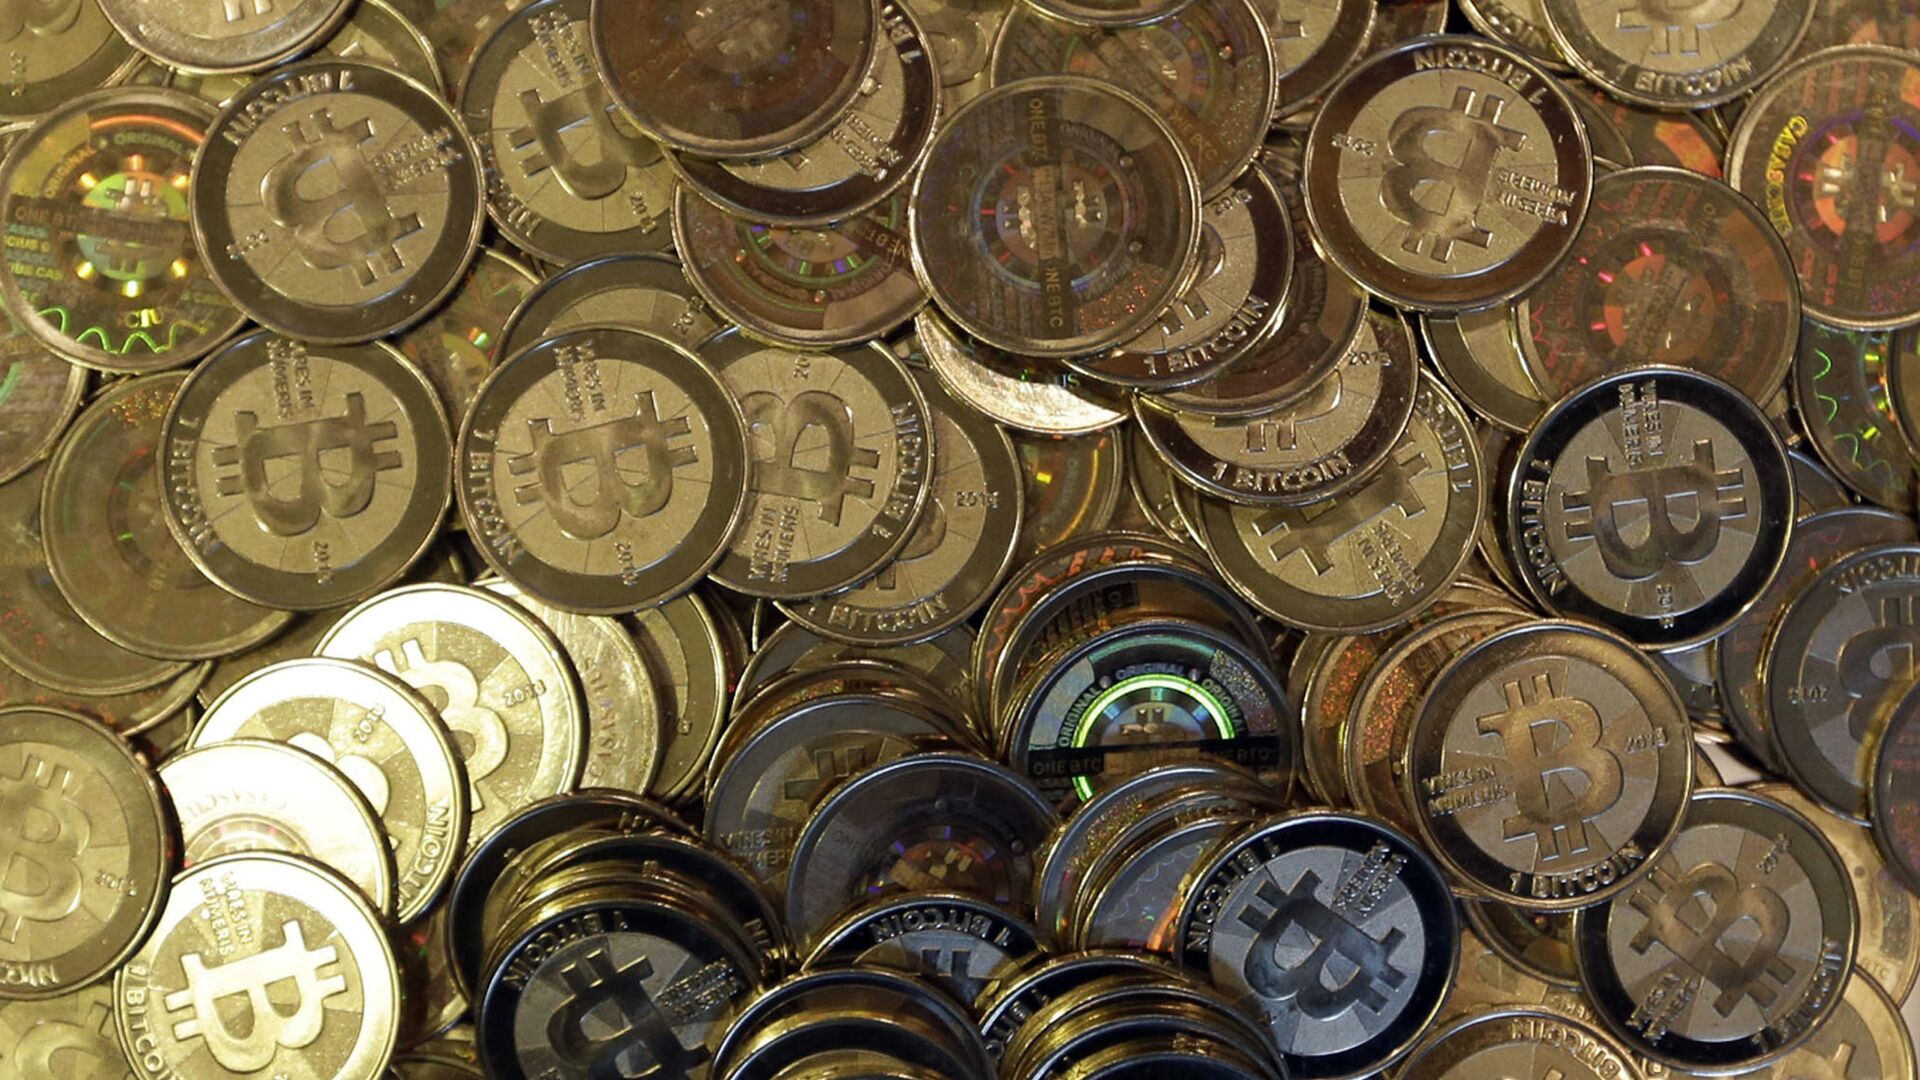 This April 3, 2013, file photo shows bitcoin tokens in Sandy, Utah. Unidentified hackers broke into the Twitter accounts of technology moguls, politicians, celebrities and major companies Wednesday, July 15, 2020, in an apparent Bitcoin scam - Sputnik International, 1920, 22.02.2021